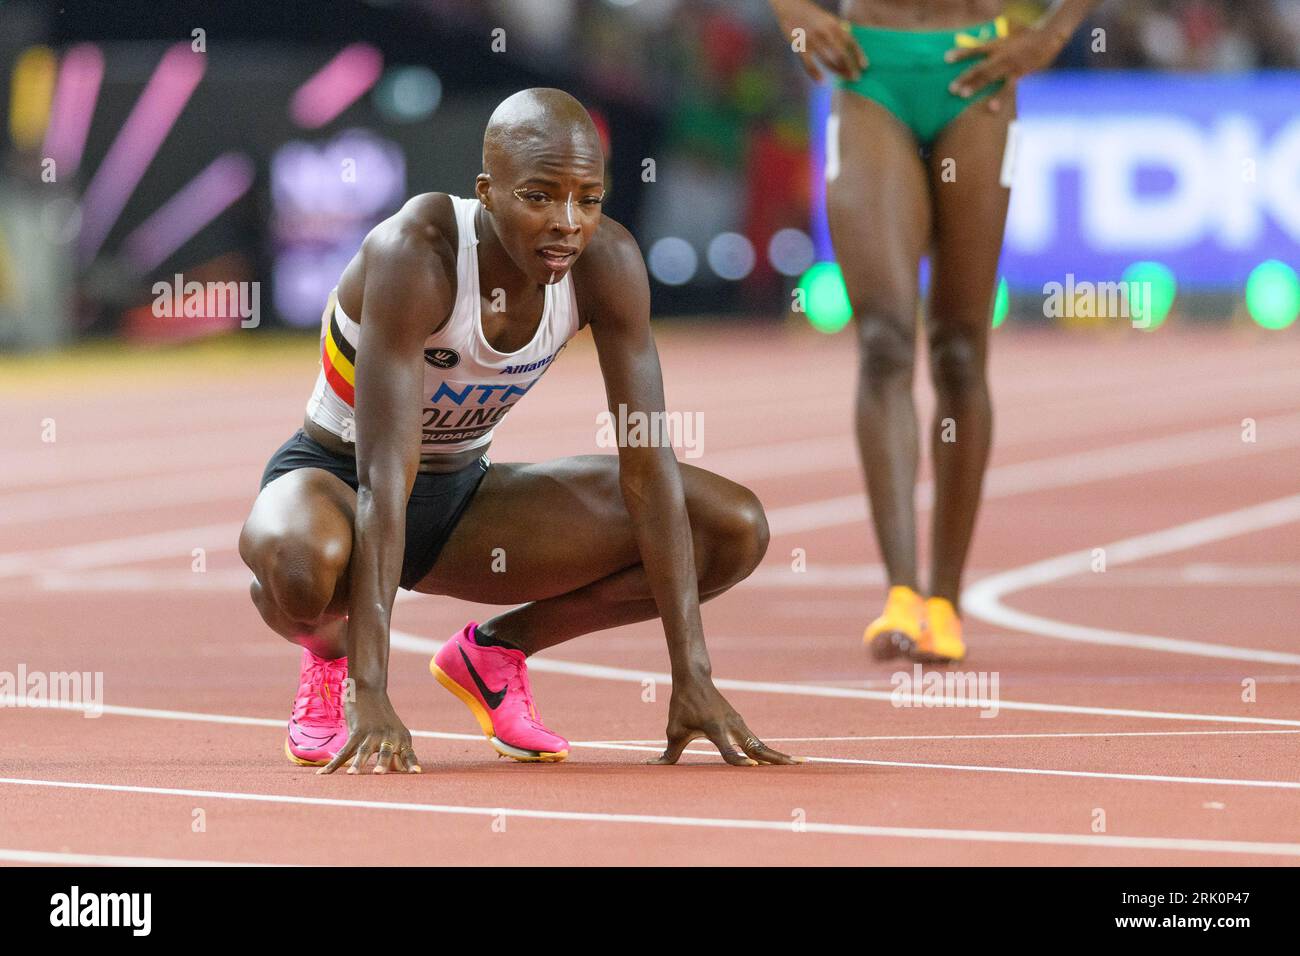 Budapest, Hungary. 23rd Aug, 2023. Cyntha Bolingo (Belgium) after the 400 metres final during the world athletics championships 2023 at the National Athletics Centre, in Budapest, Hungary. (Sven Beyrich/SPP) Credit: SPP Sport Press Photo. /Alamy Live News Credit: SPP Sport Press Photo. /Alamy Live News Stock Photo